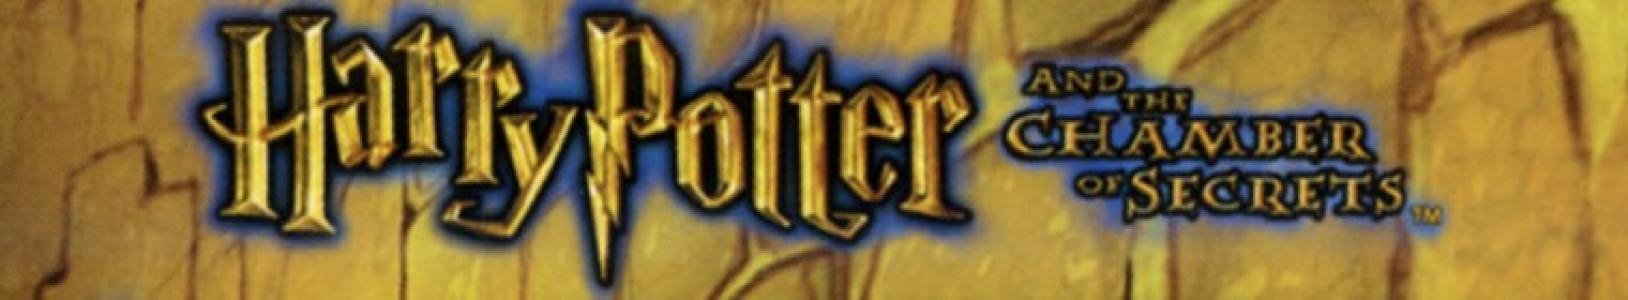 Harry Potter and the Chamber of Secrets banner